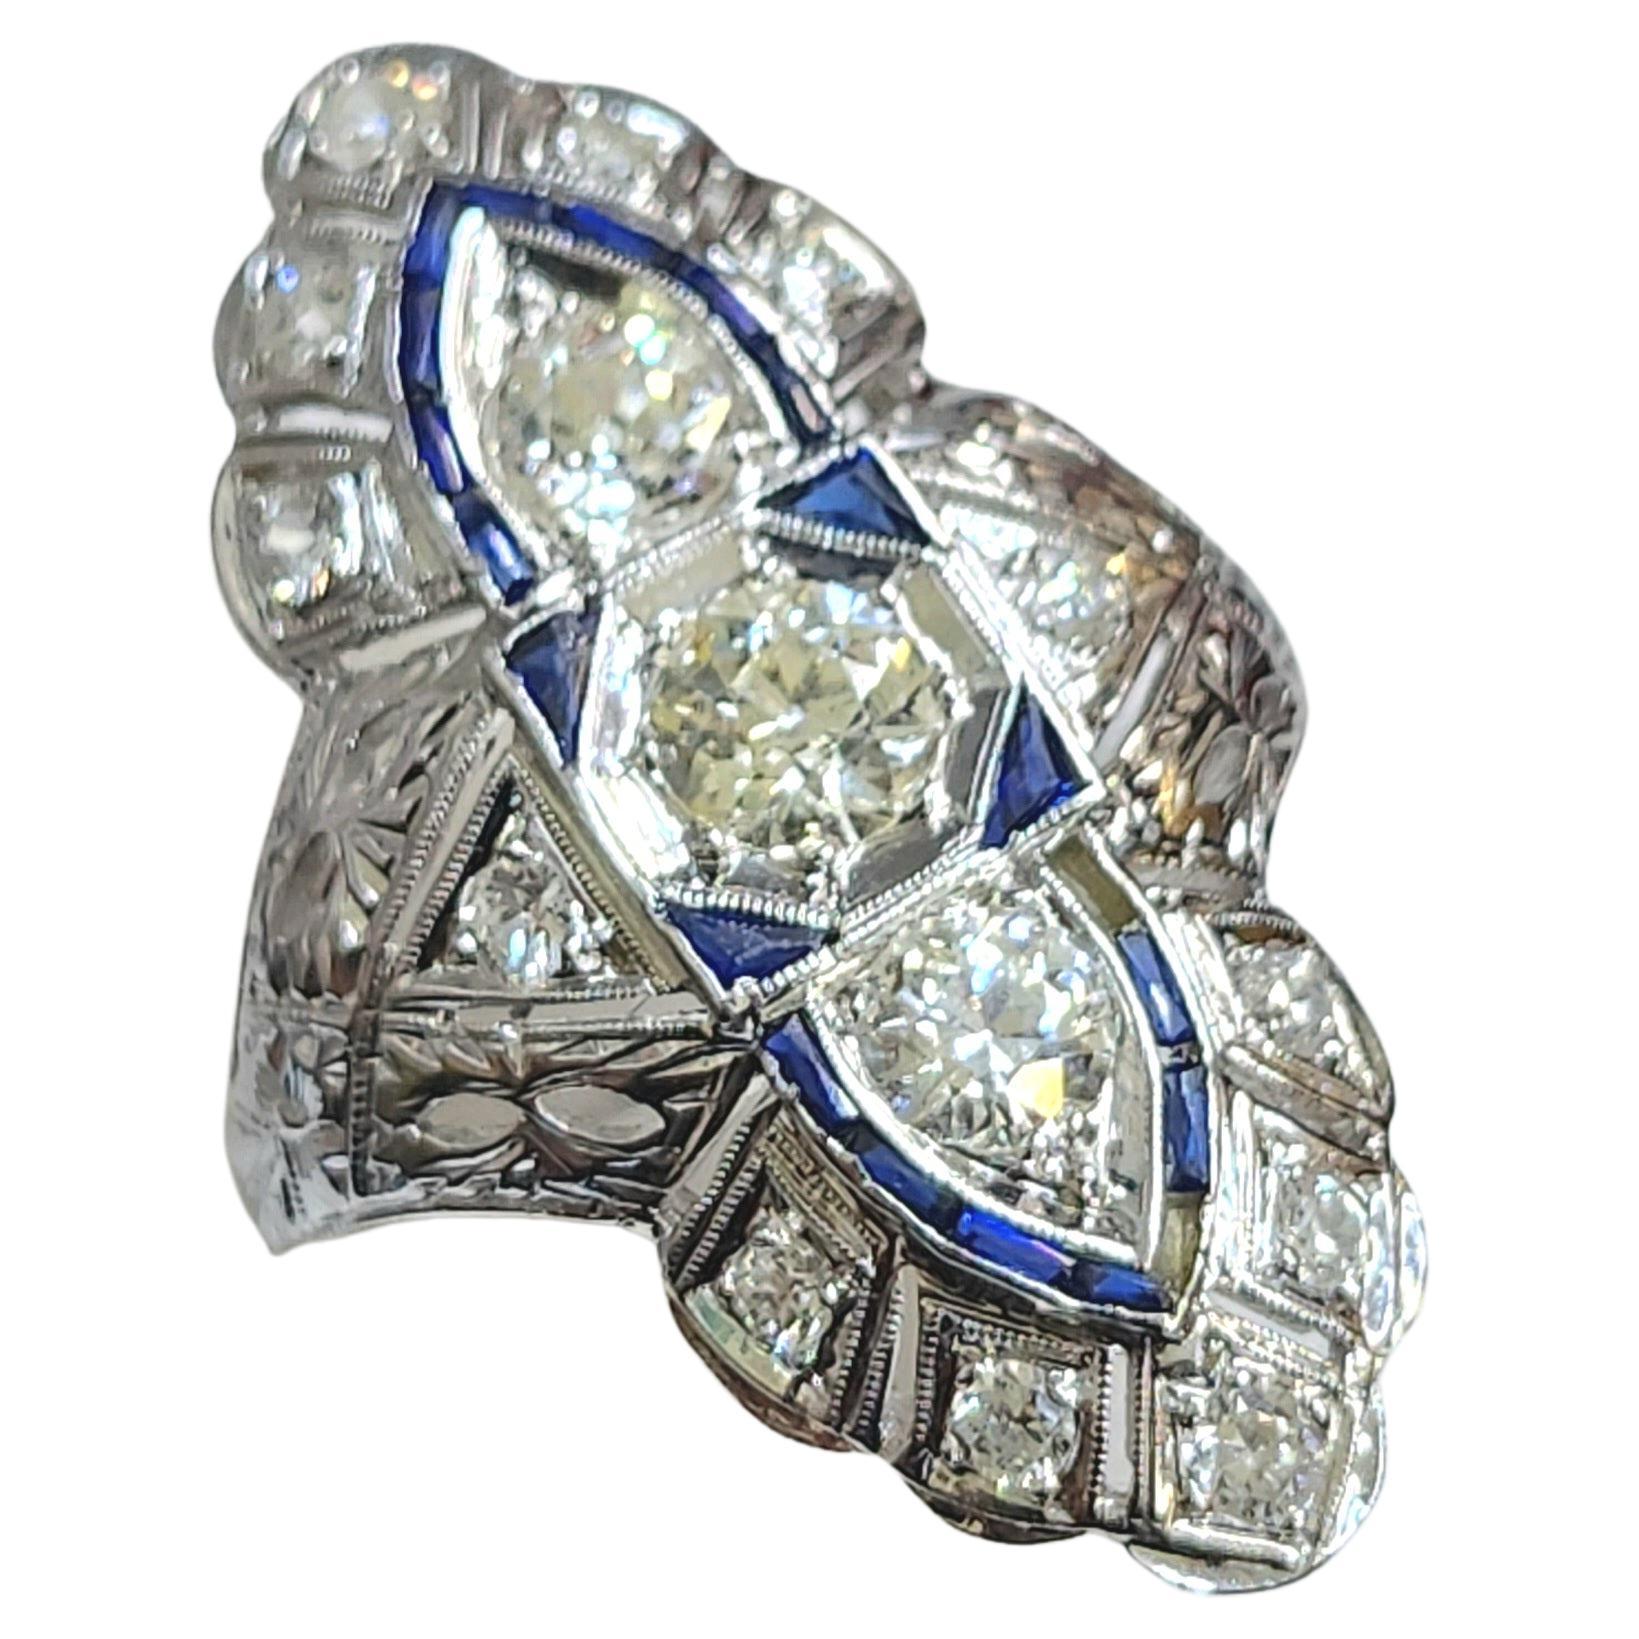 1920s orginal art deco period large ring with an estimate old cut diamond weight of 1.20 carars H color white vs clearity decorted with blue baguet cut sapphires ring head lenght 3 cm hall marked platinum